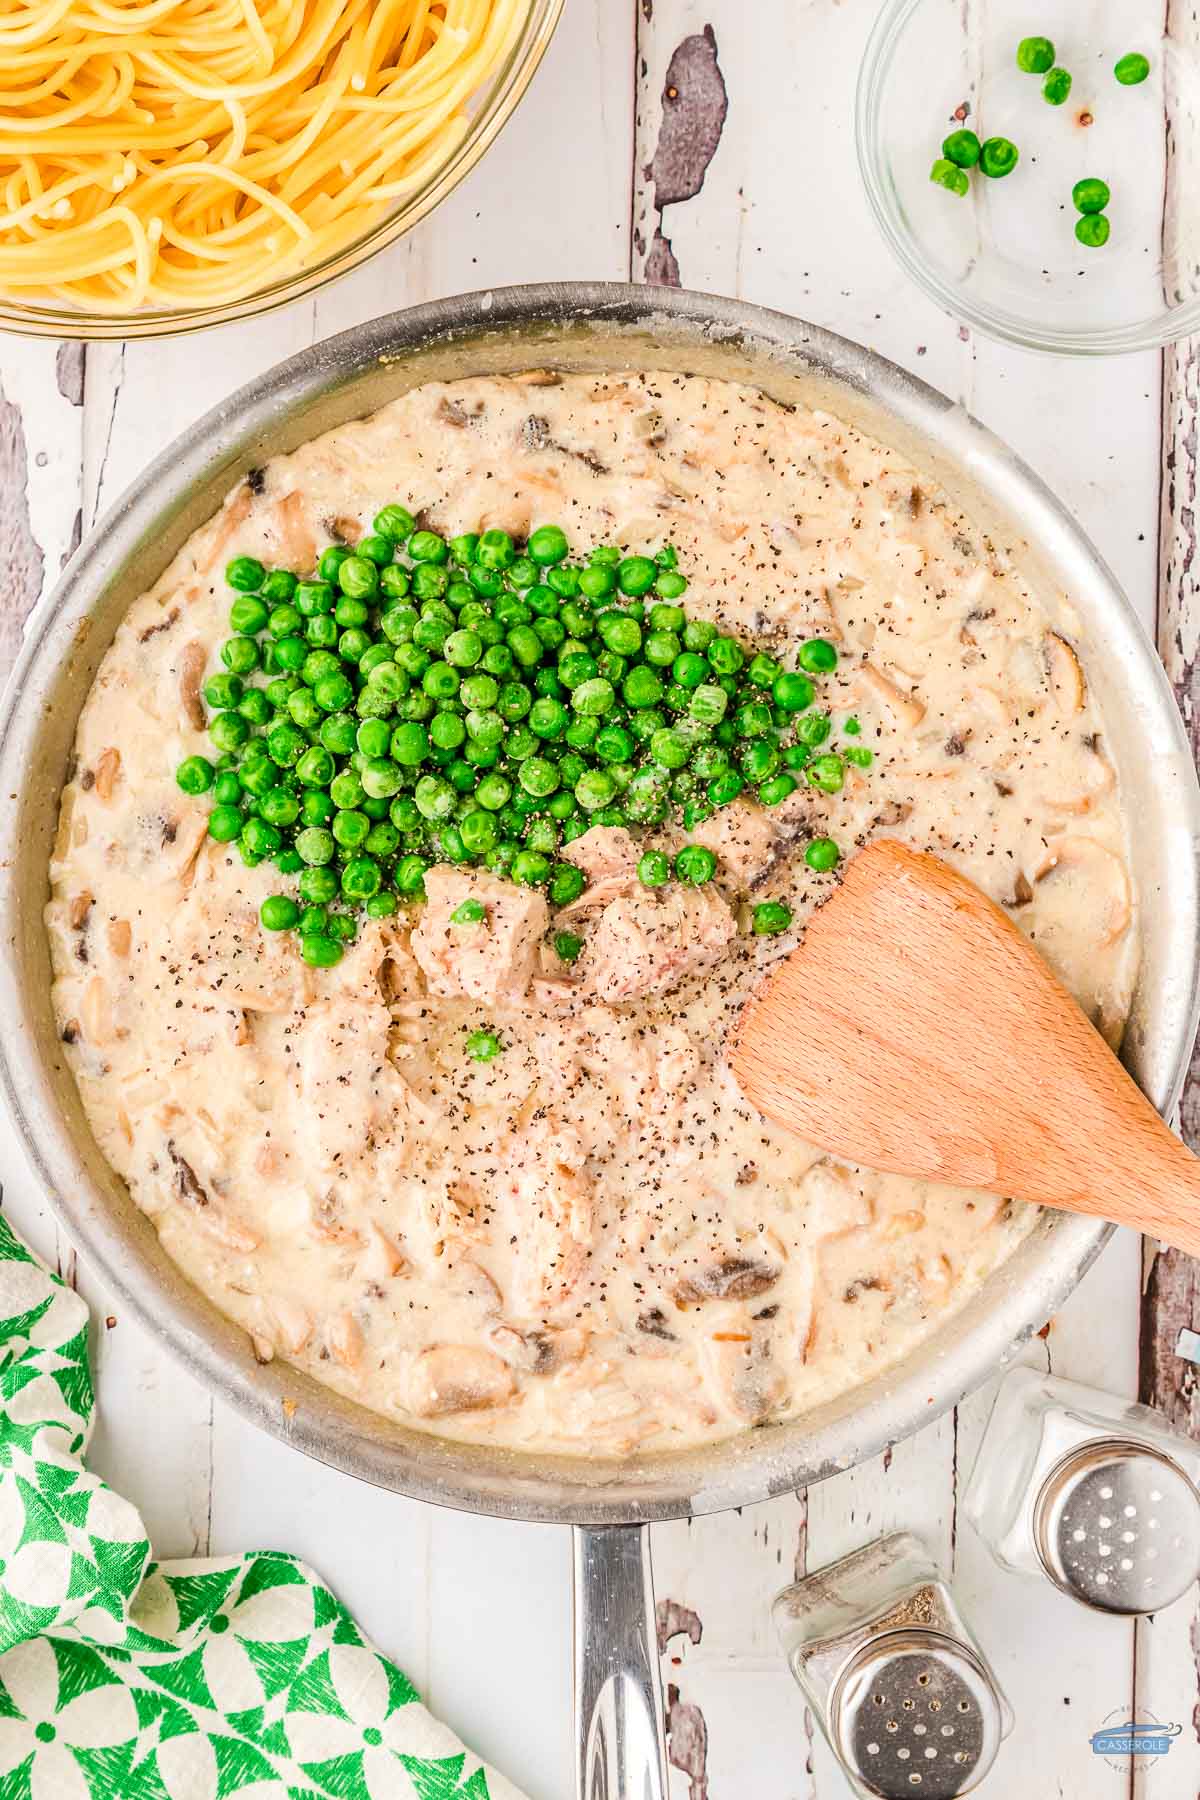 bite-size pieces of tuna and peas in a skillet